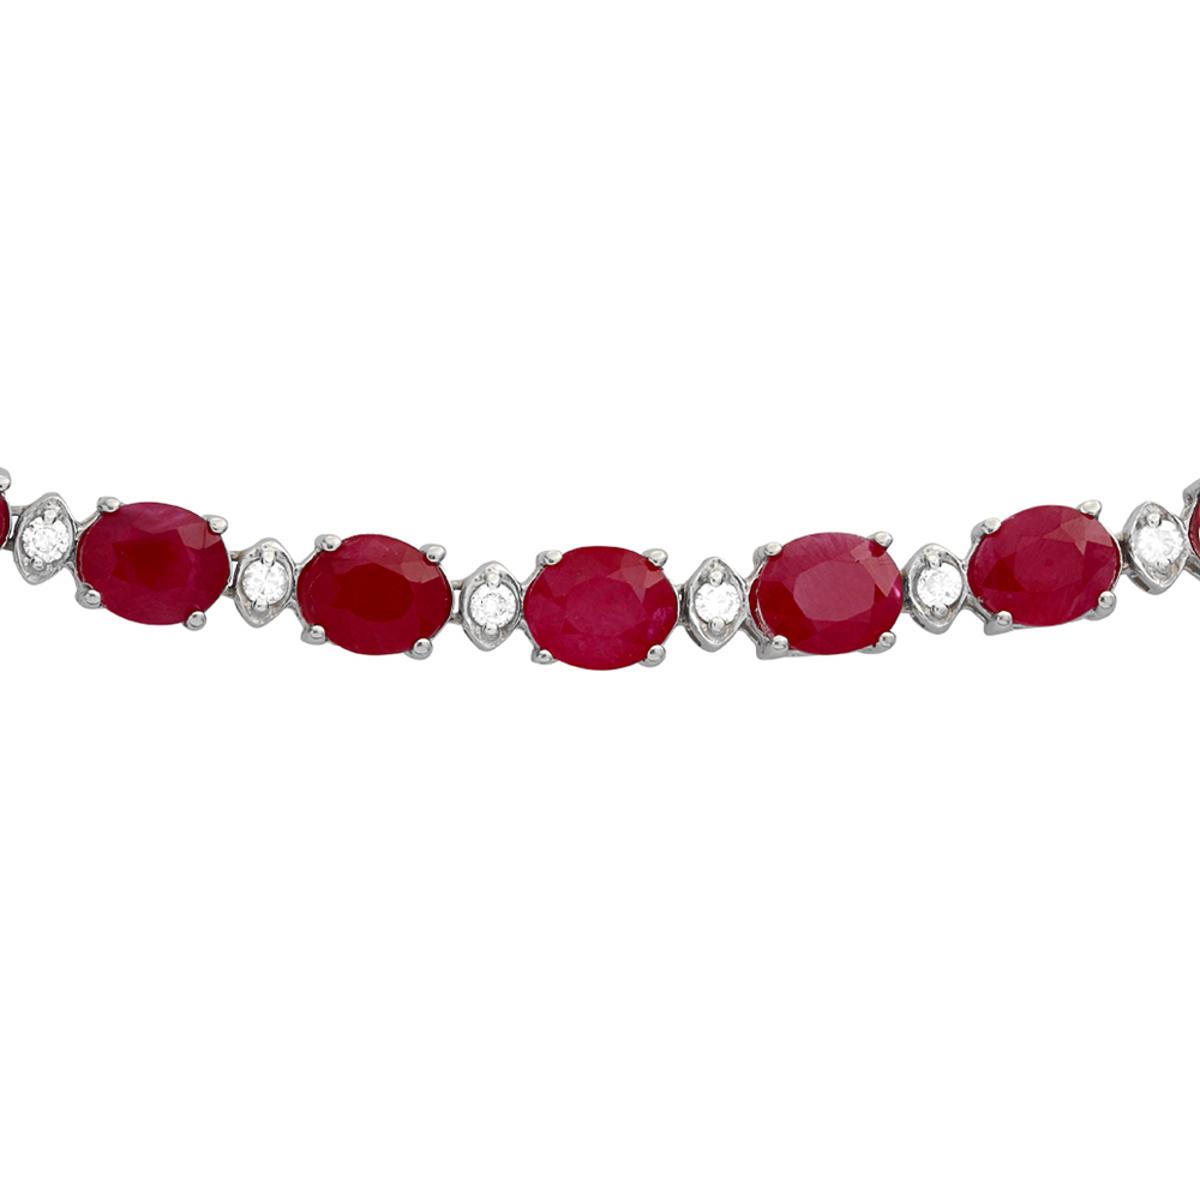 14k White Gold 38.51ct Ruby 1.49ct Diamond Necklace